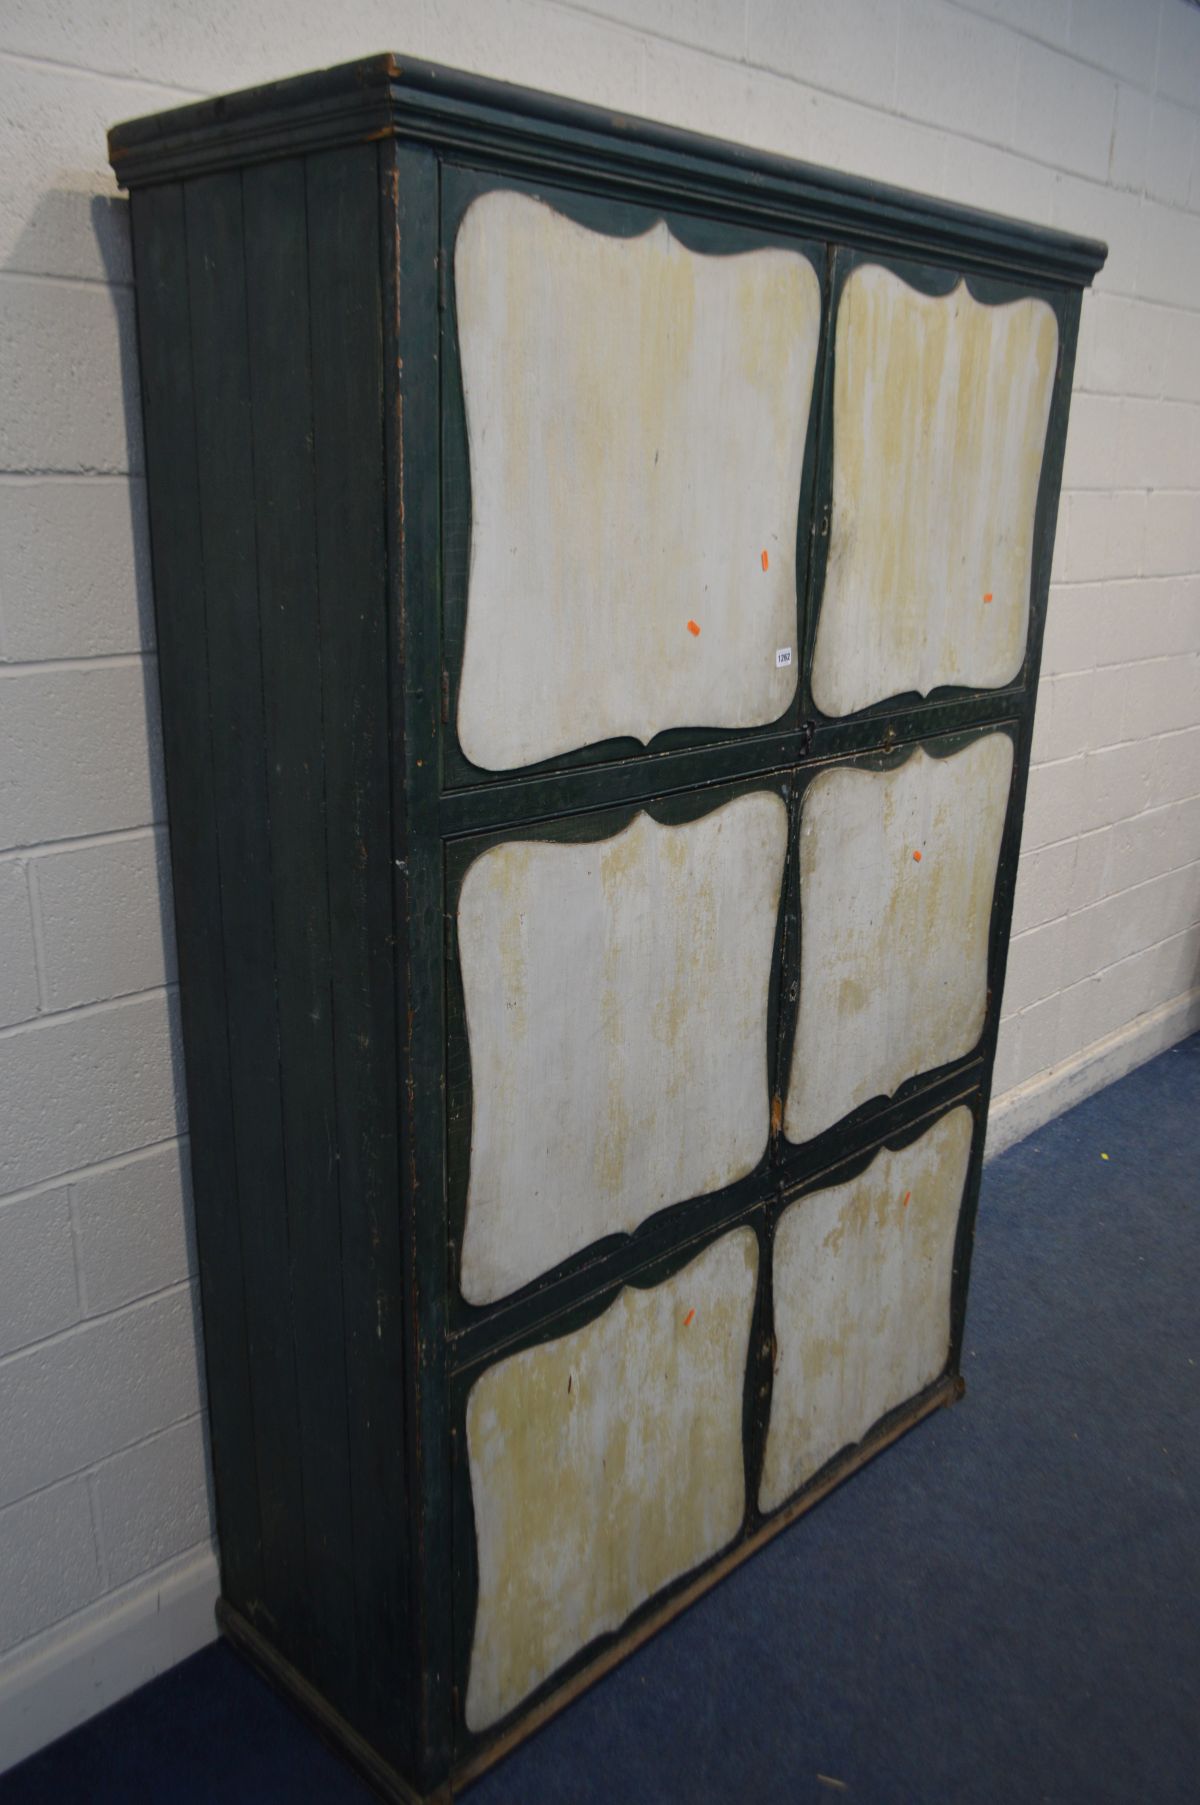 AN EARLY 20TH CENTURY GREEN PAINTED PINE HOUSE KEEPERS CUPBOARD,, with a fixed cornice, six doors - Image 2 of 4